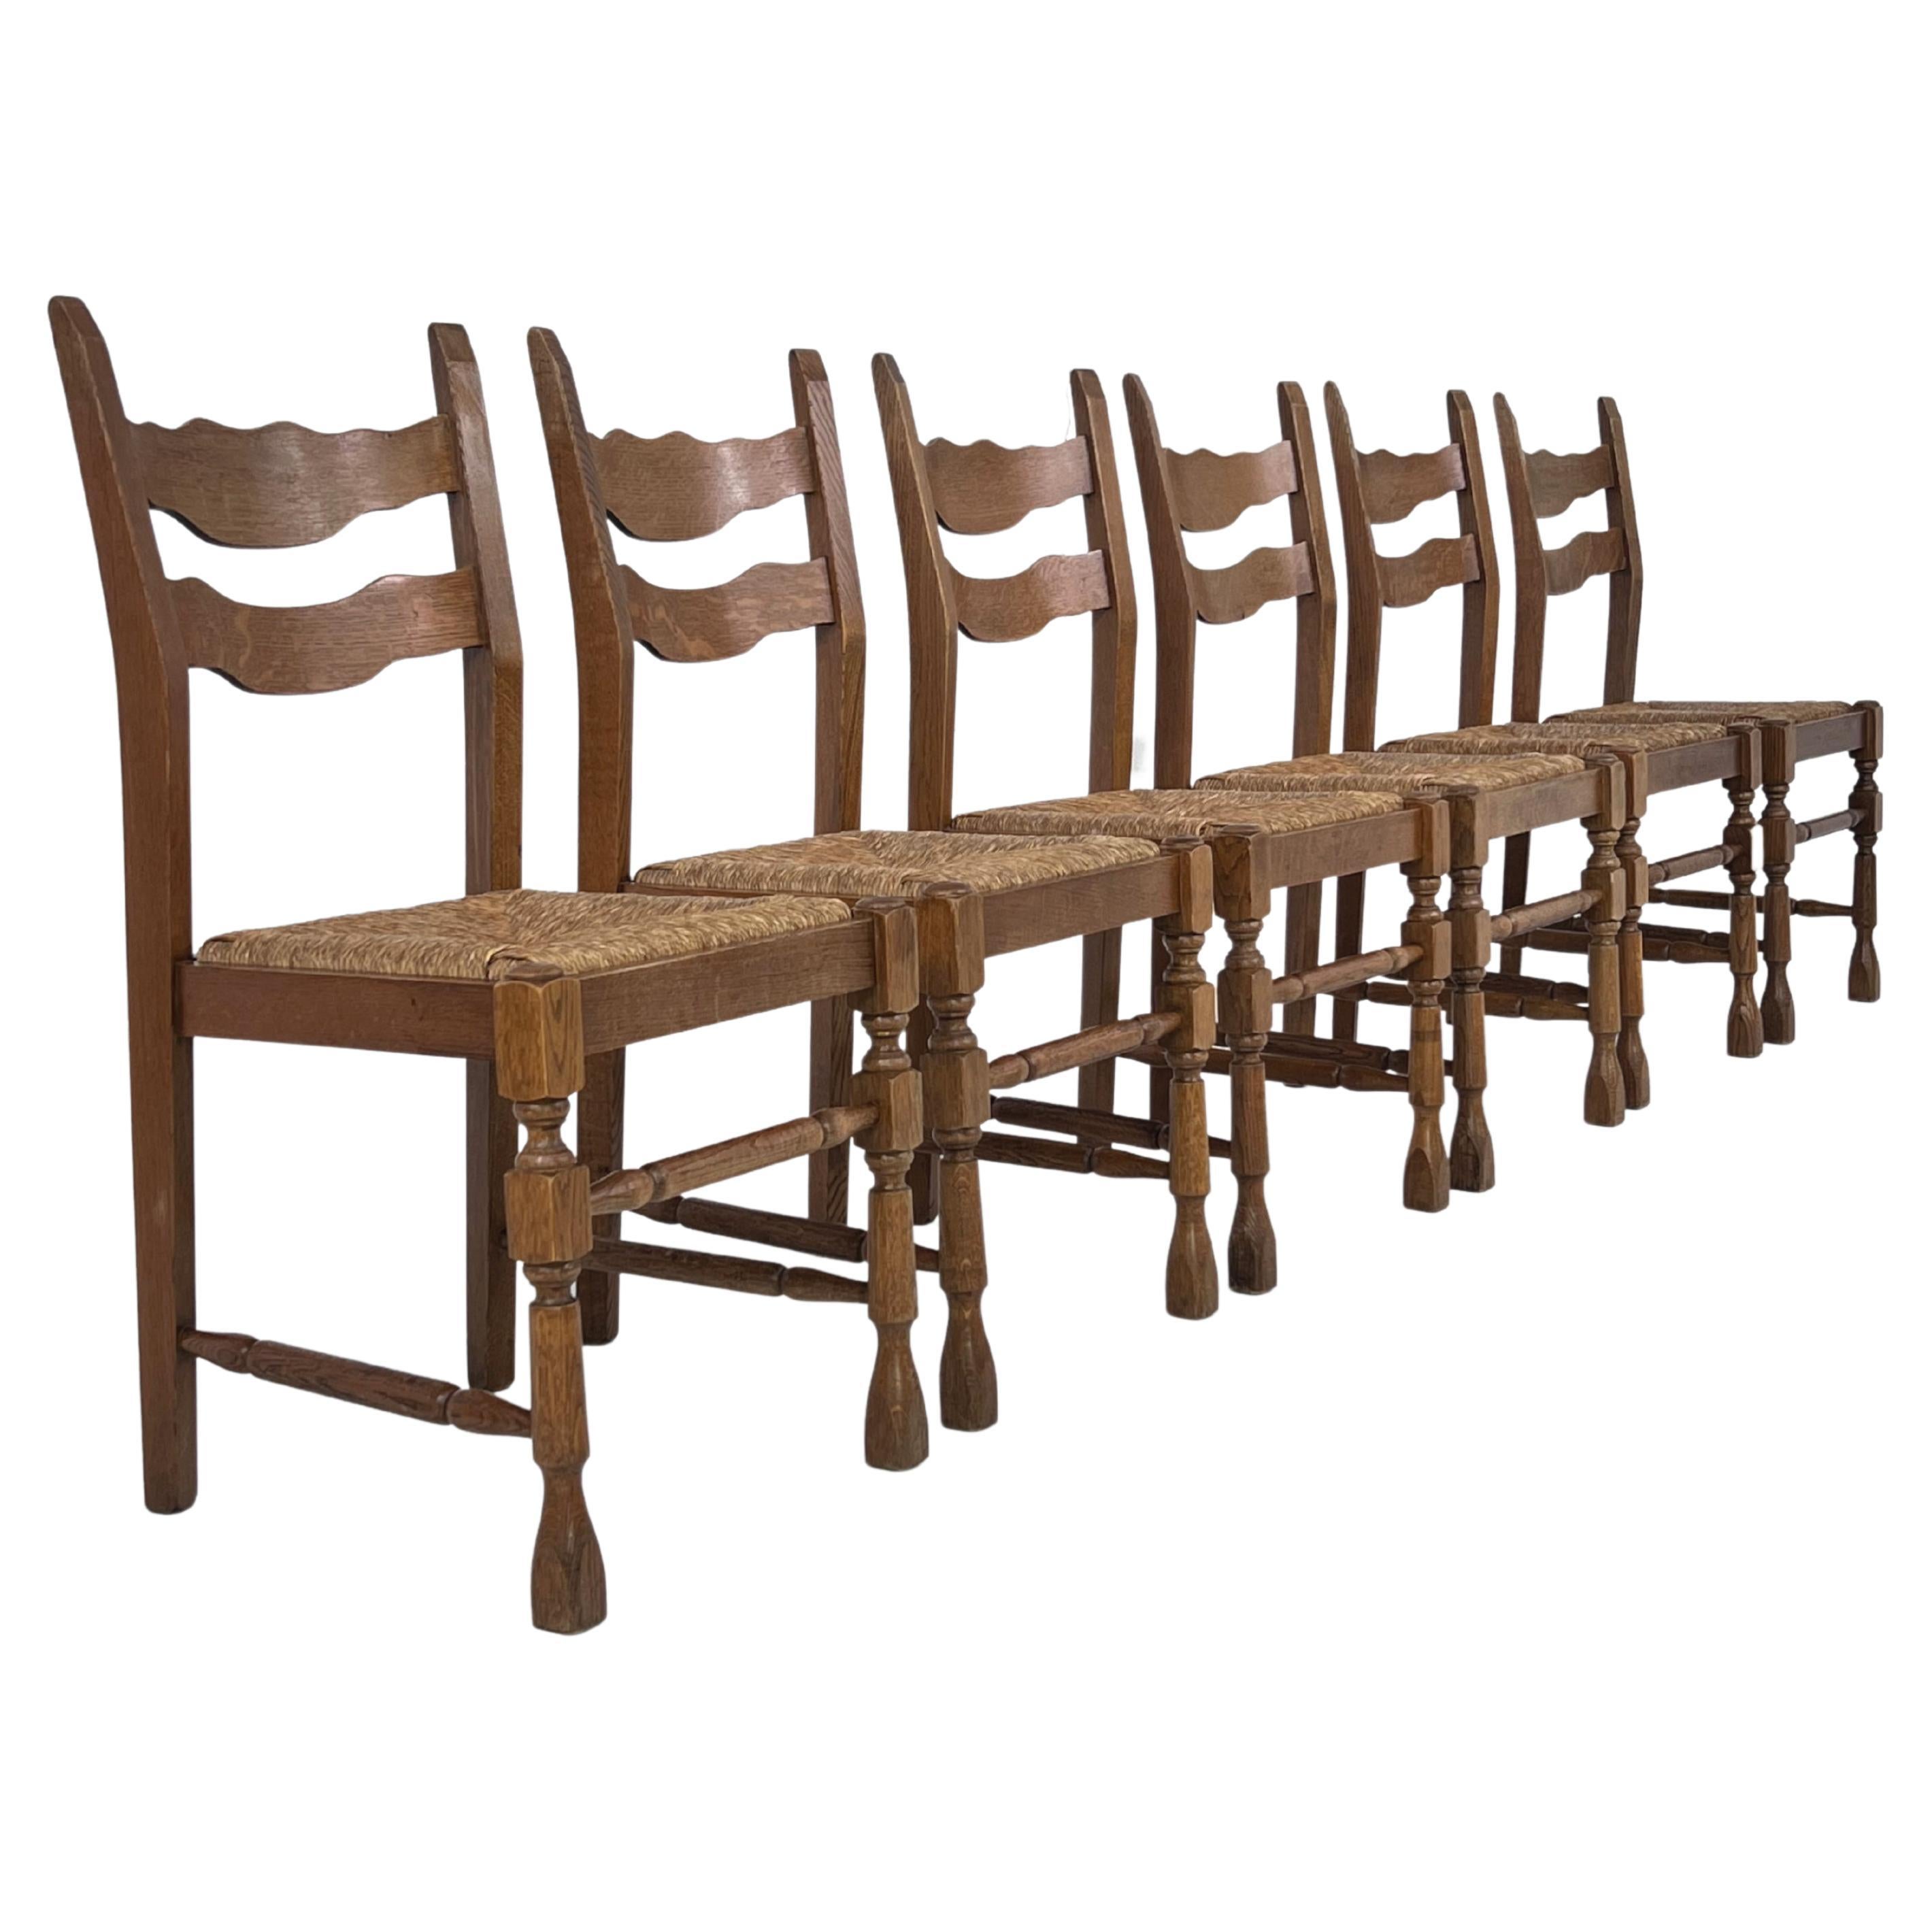 1950s Design Oak Wooden and Braided Straw Seats Set of 6 Chairs